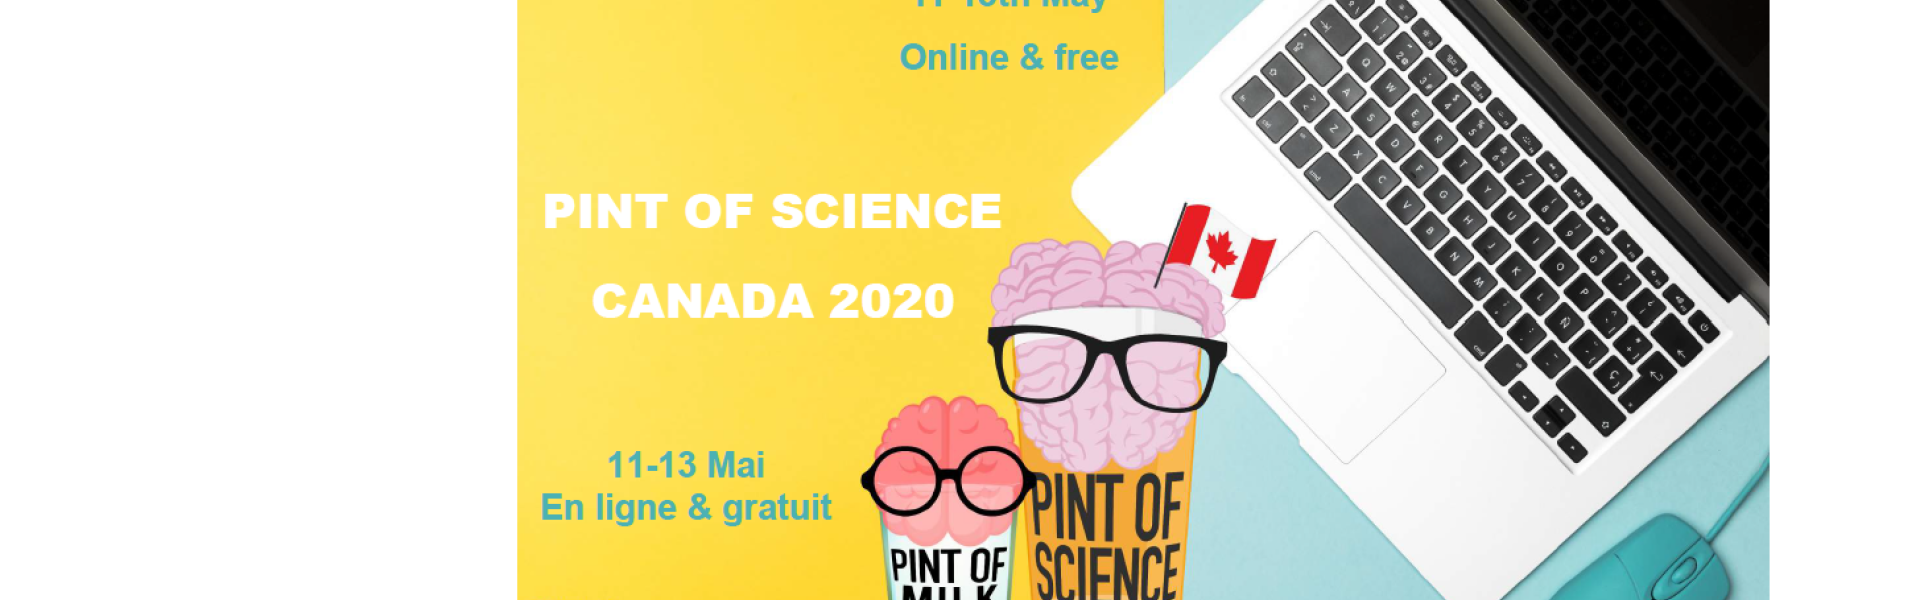 Pint of Science Canada 2020